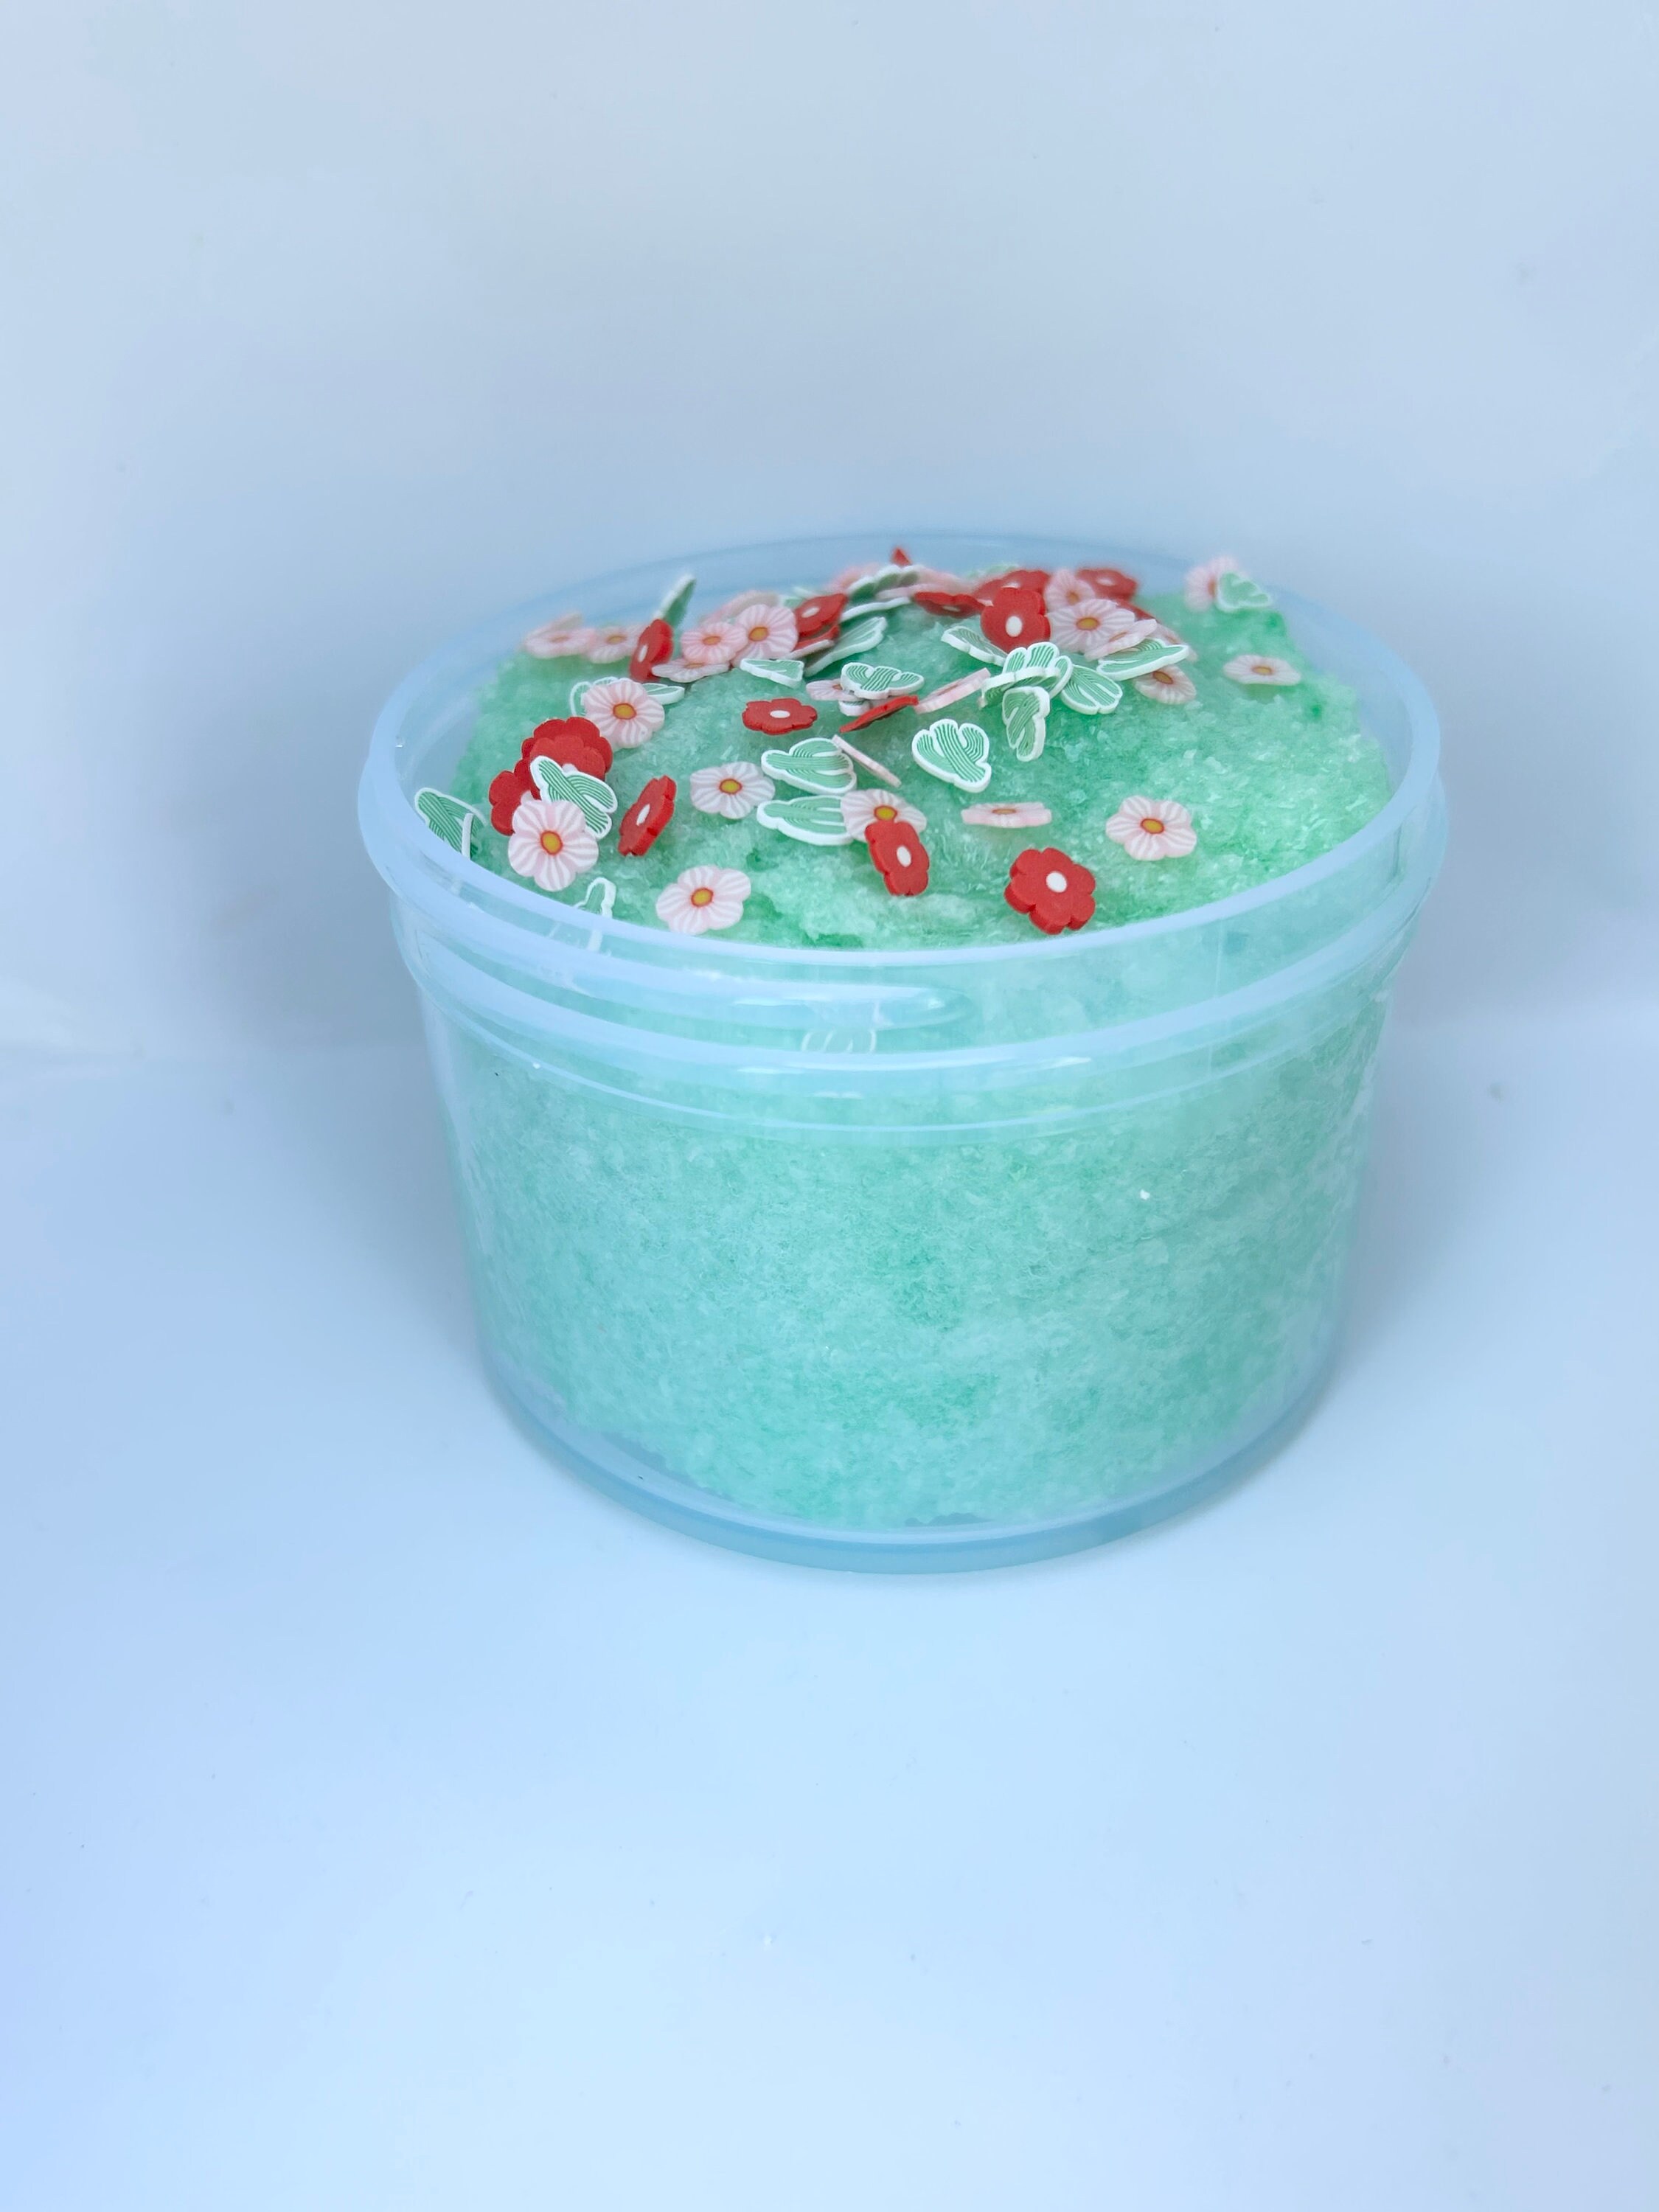 Hello Crunchiness  Plastic Fake Snow For Crunchy Slime – Slime